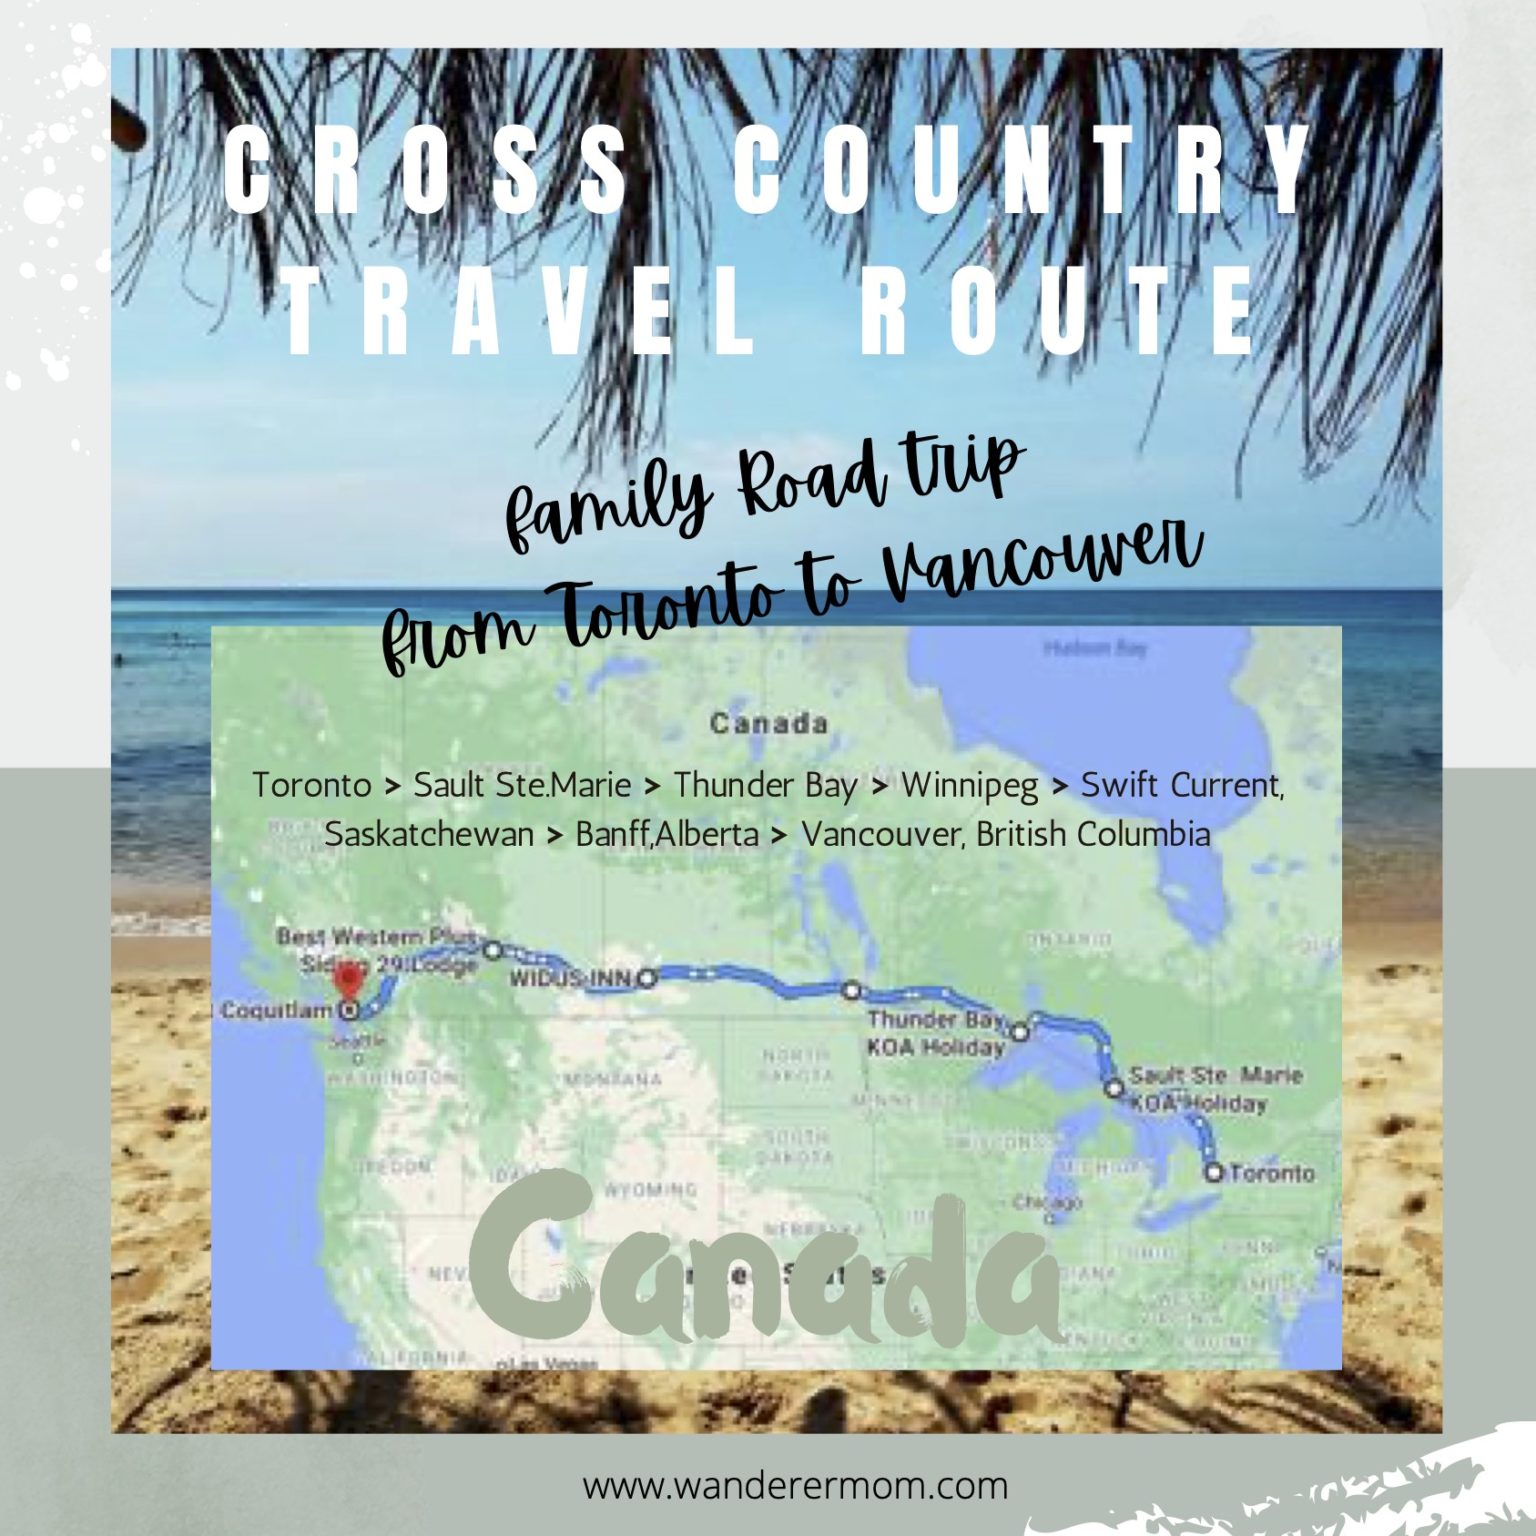 vancouver to toronto road trip itinerary